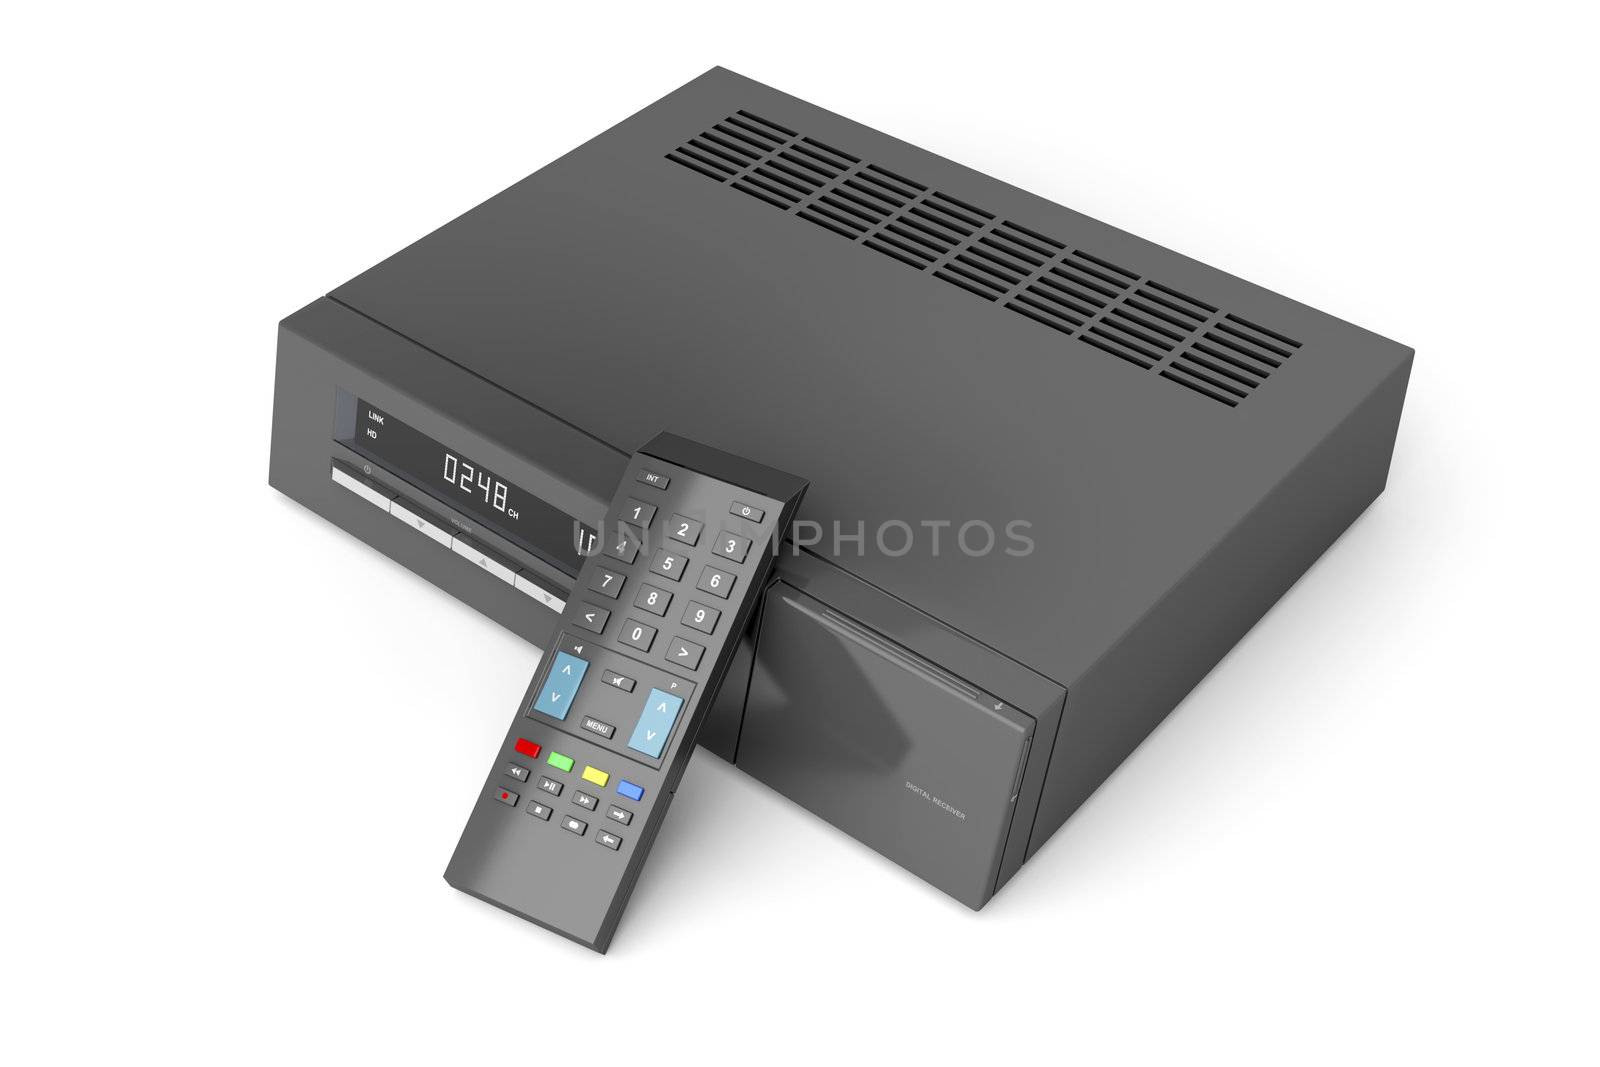 Digital receiver with remote control on white background